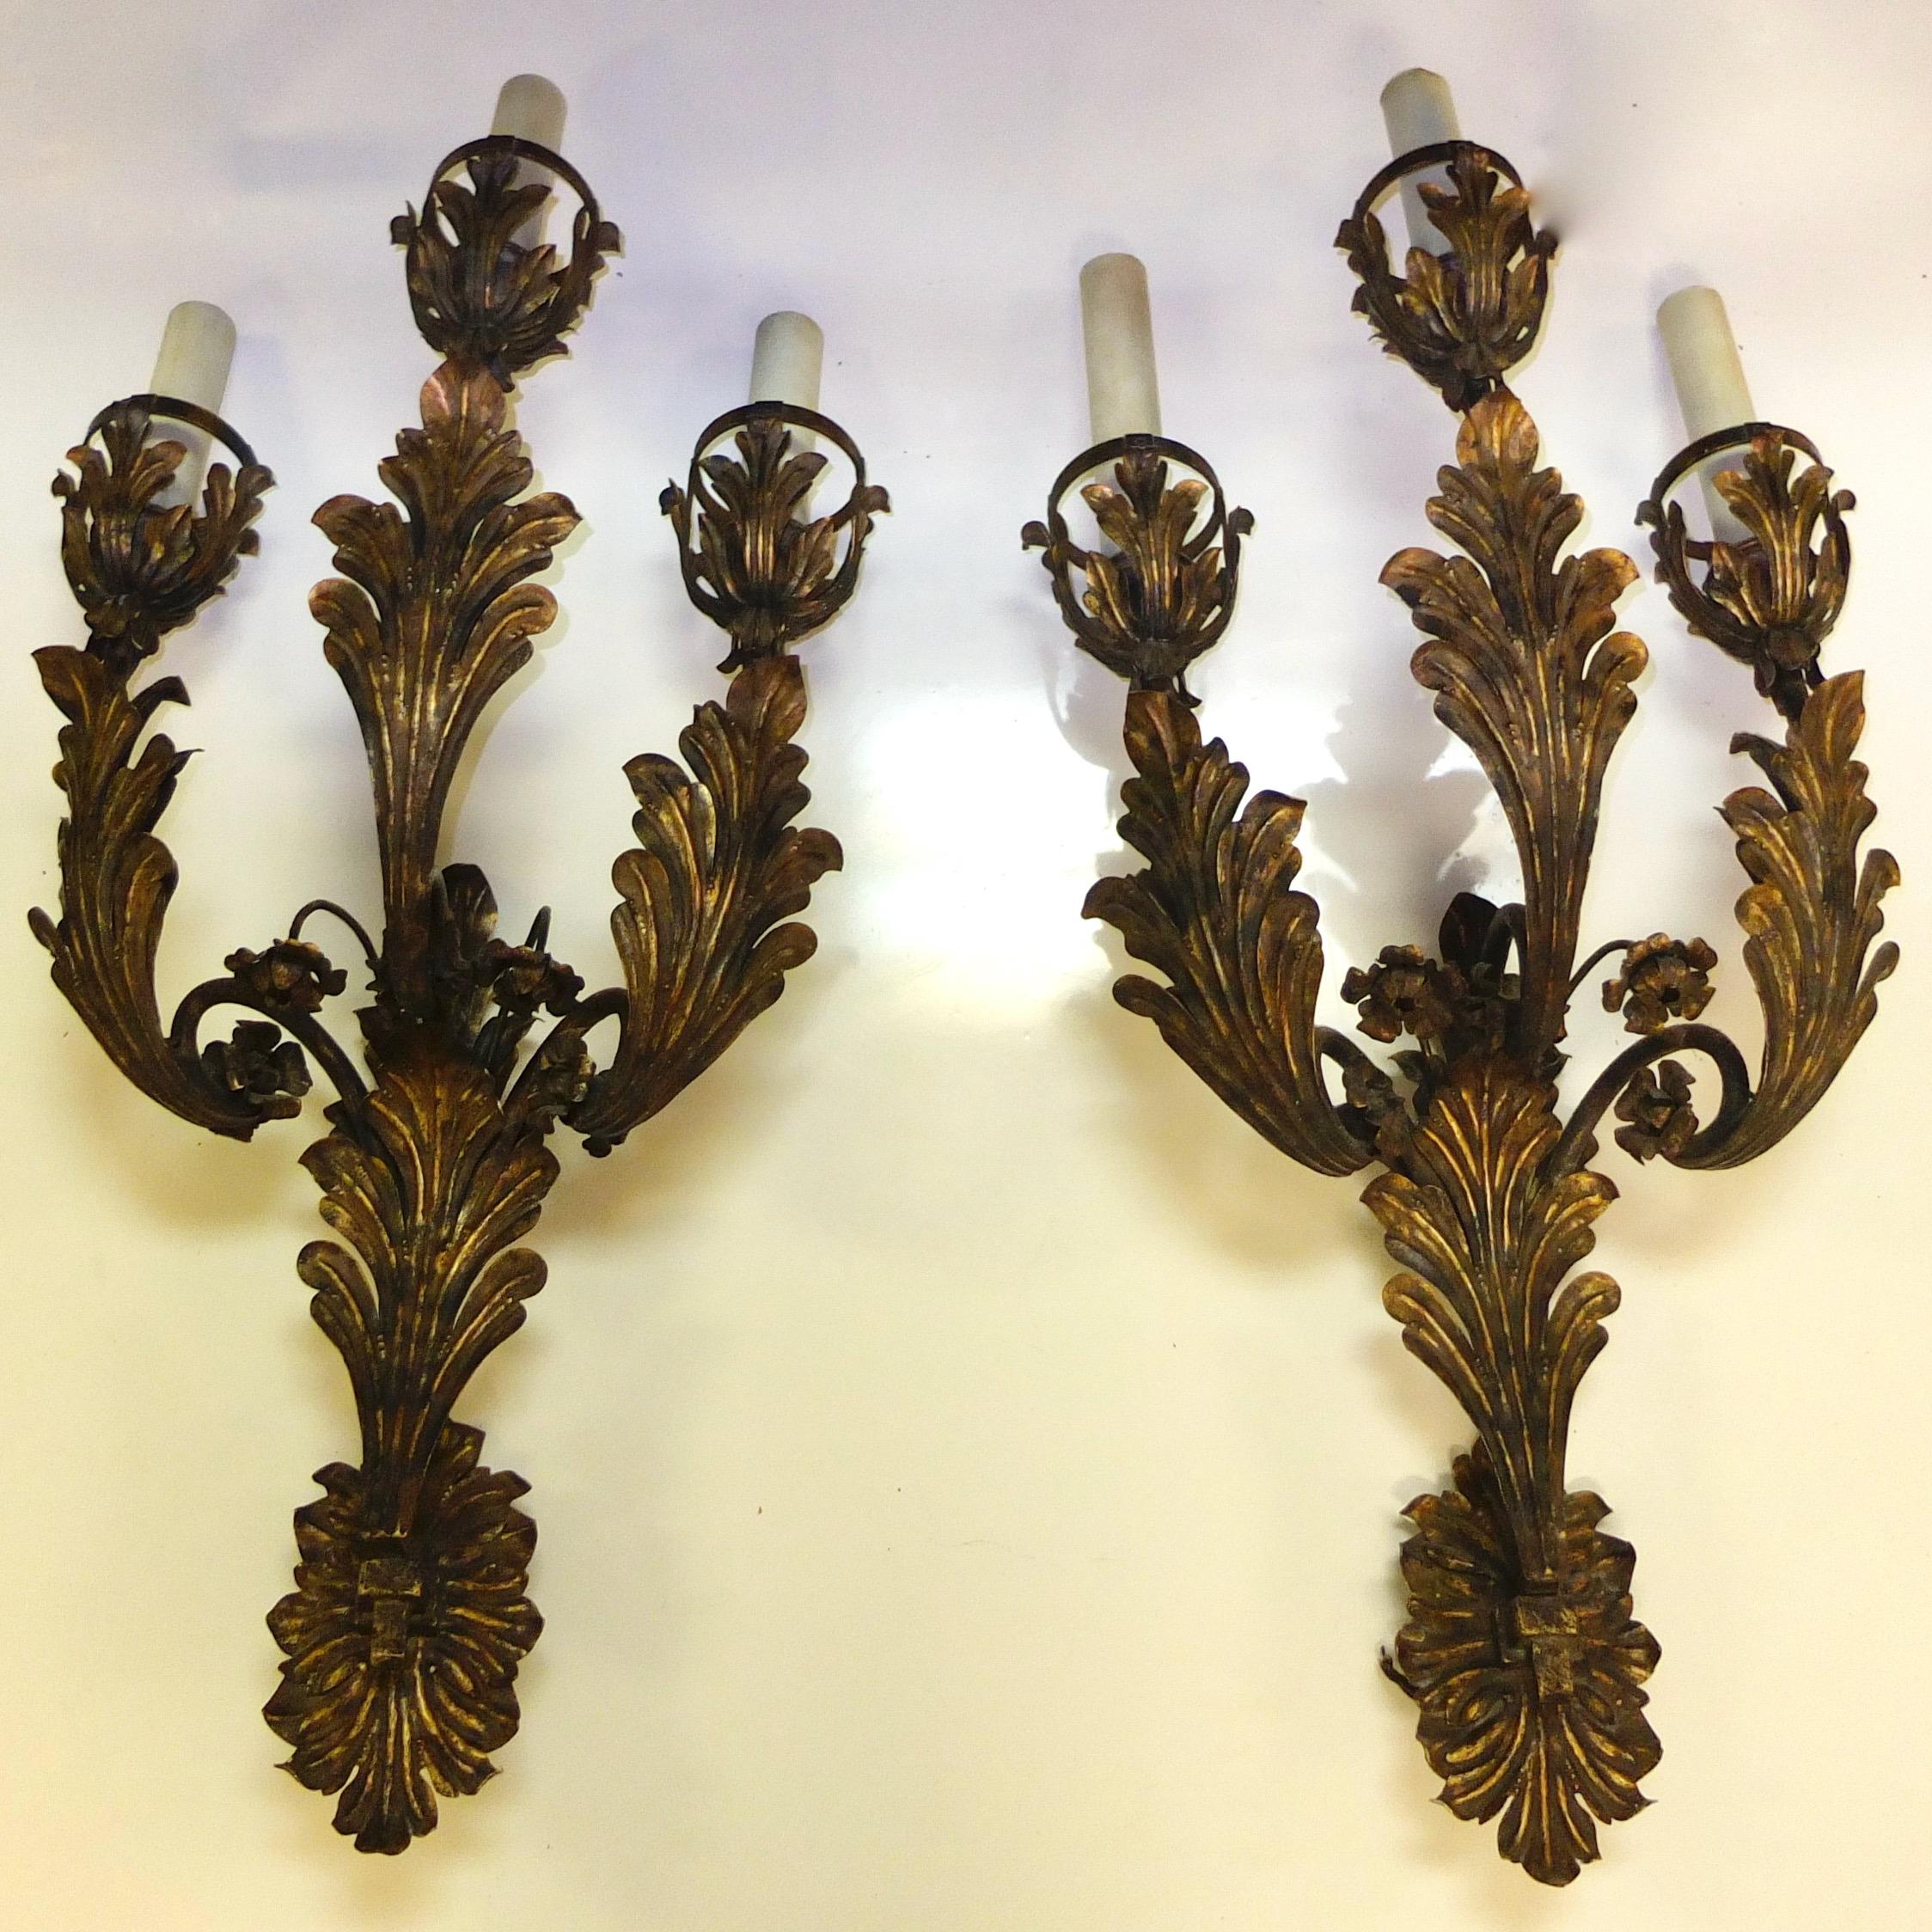 Pair of arrestingly beautiful and monumental Italian three branch wall lights constructed of cast iron with tole acanthus leaves finished in gilt bronze patination. Original off white enameled aluminum candle sleeves. Each takes three standard